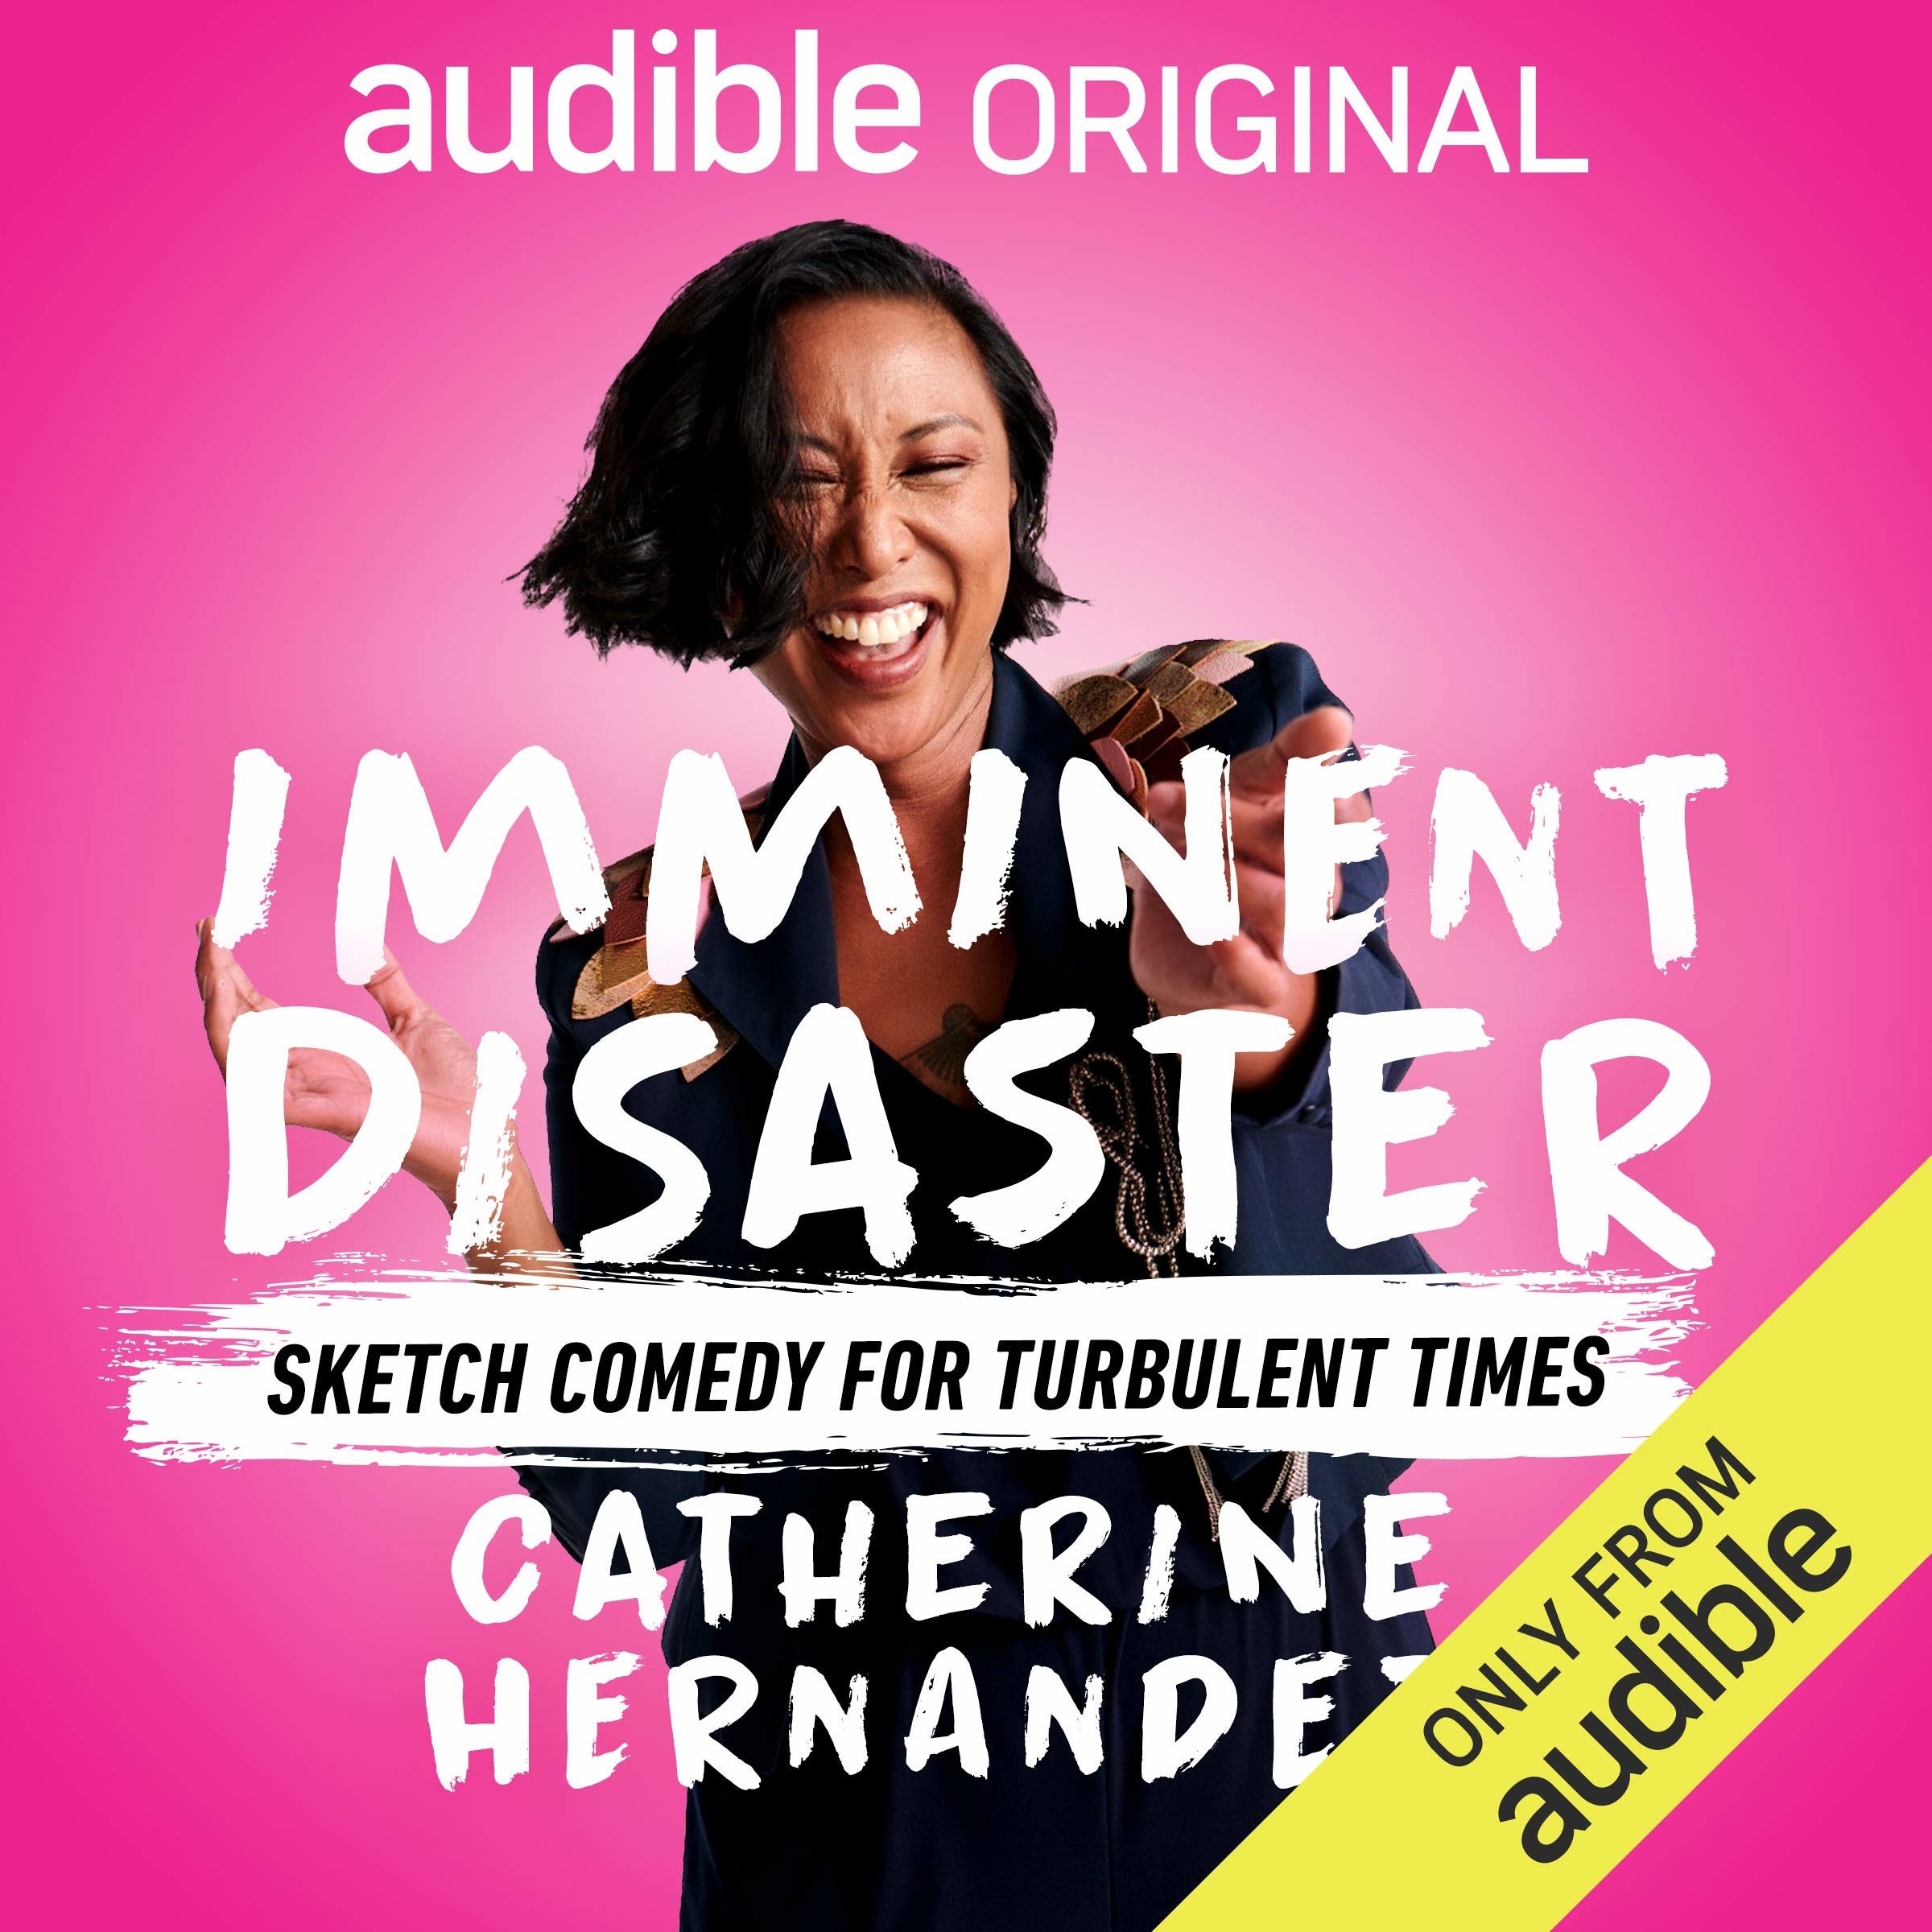 The cover of Catherine Hernandez&#x27;s audiobook &quot;Imminent Disaster&quot;